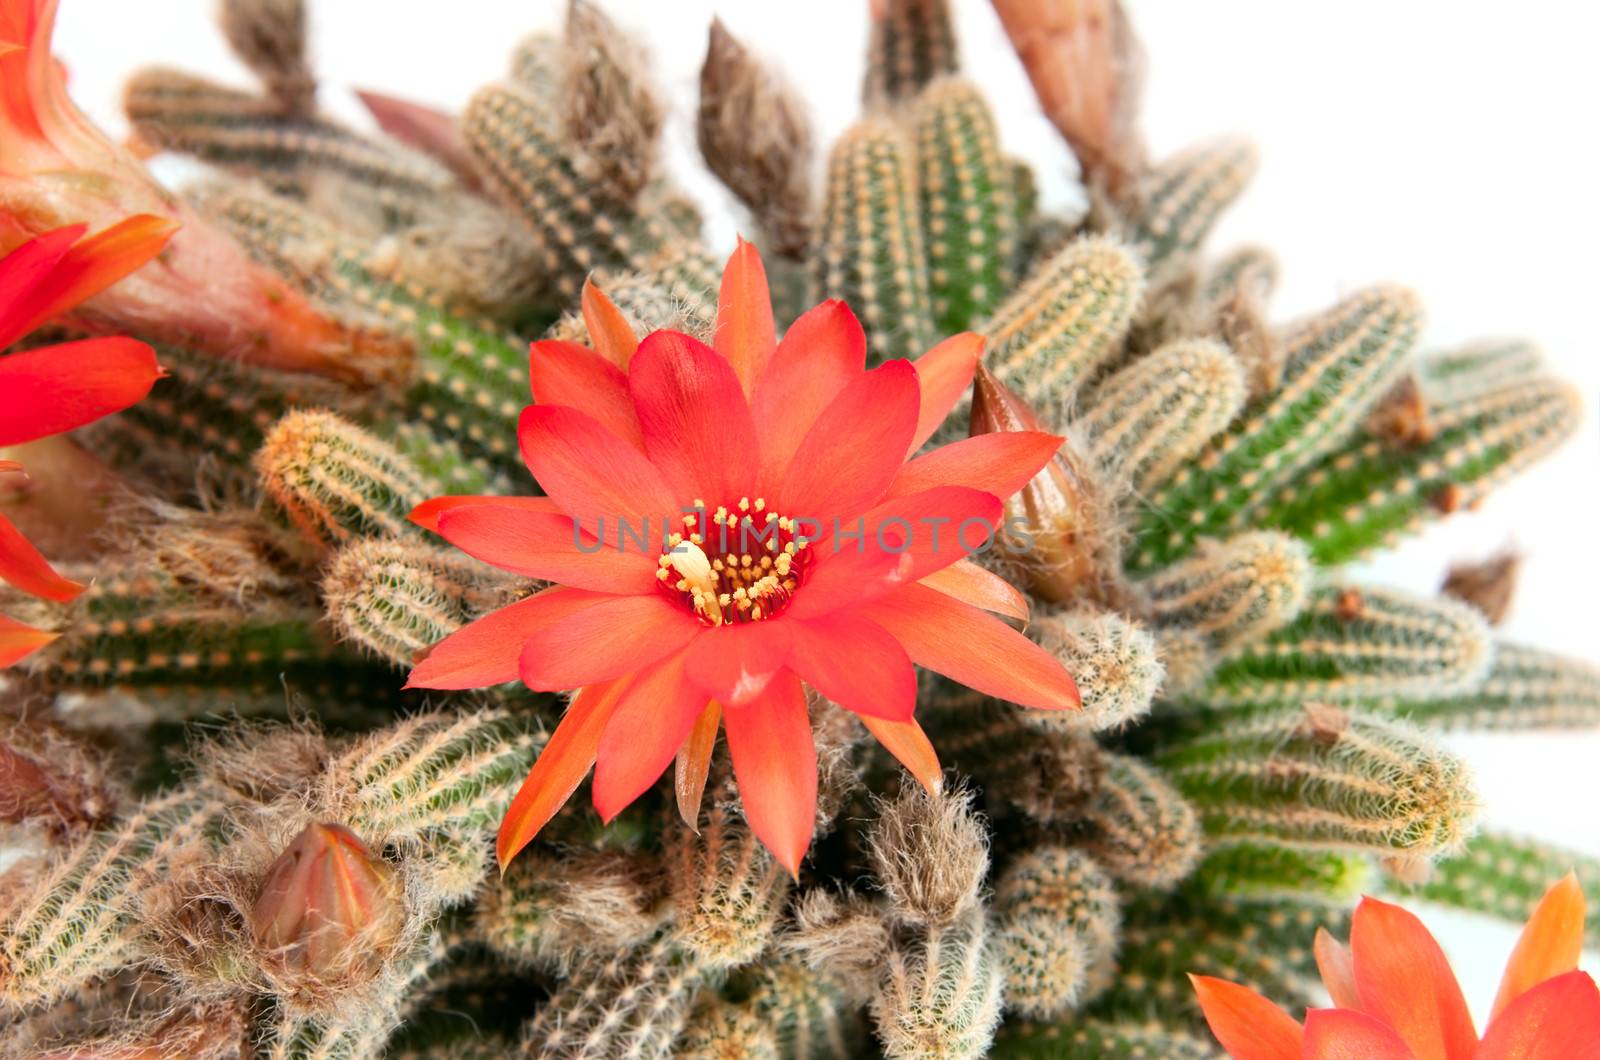 red cactus flower over white by catolla